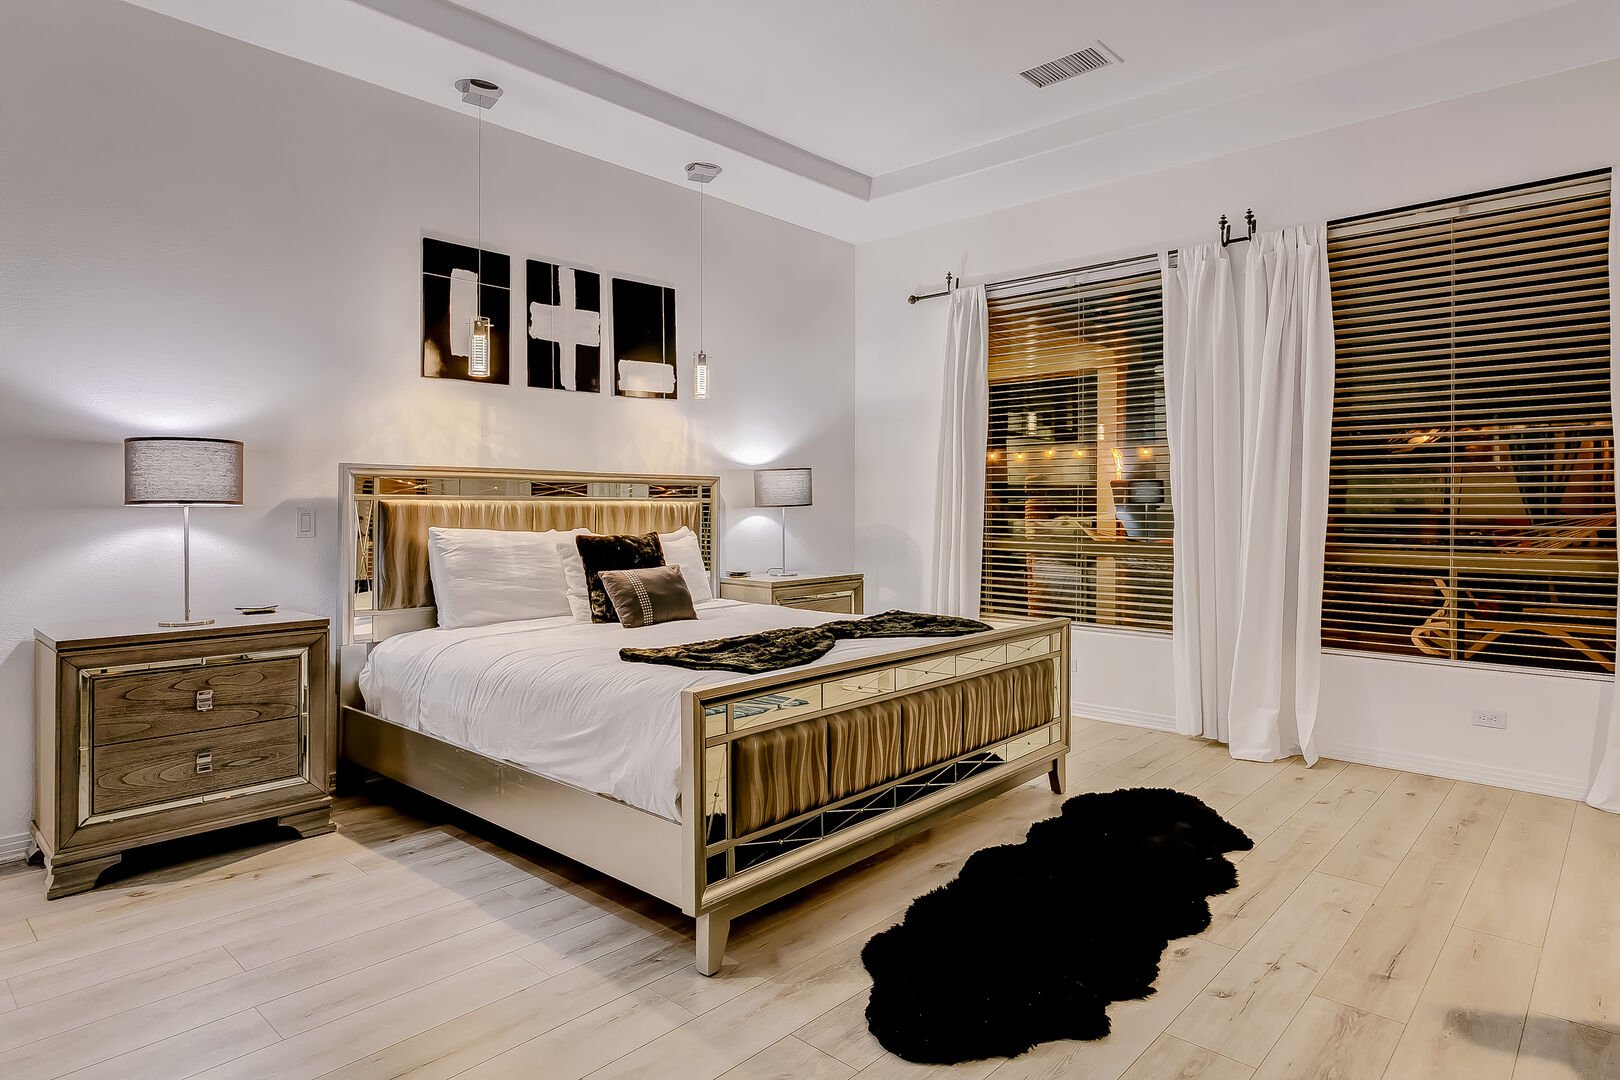 The master closets are so BIG, they each have fully made twin beds in them (these beds are NOT listed in the final bed count and are for overflow sleeping ONLY). The master bedroom has it's own separate access to the back yard!